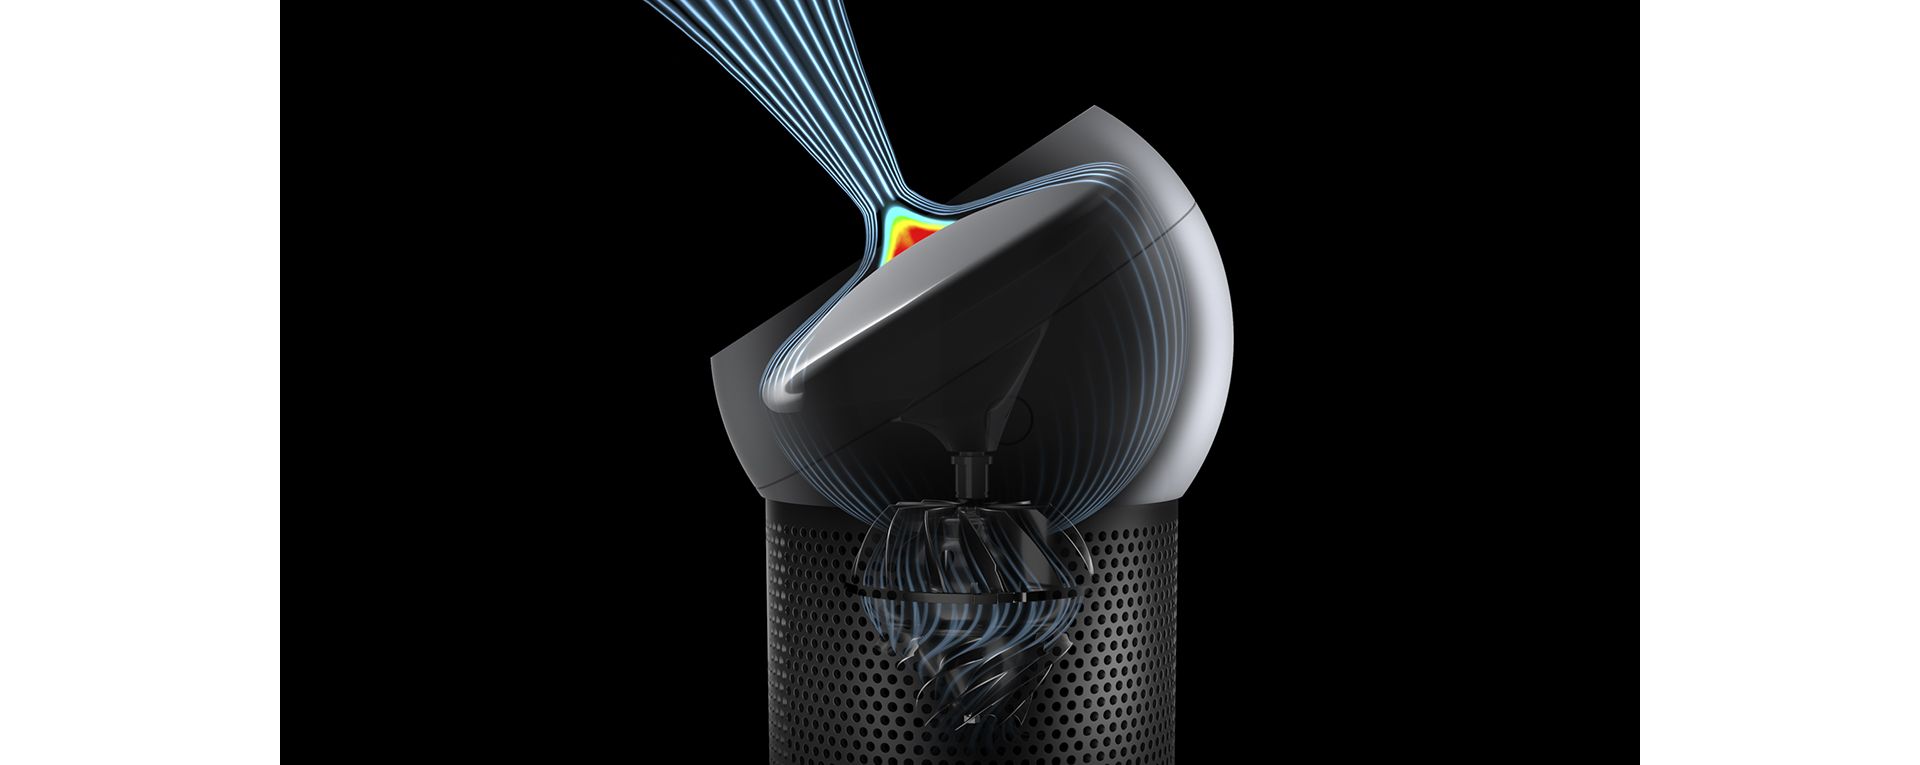 Purified air coalesces and is projected from the Dyson Pure Cool Me